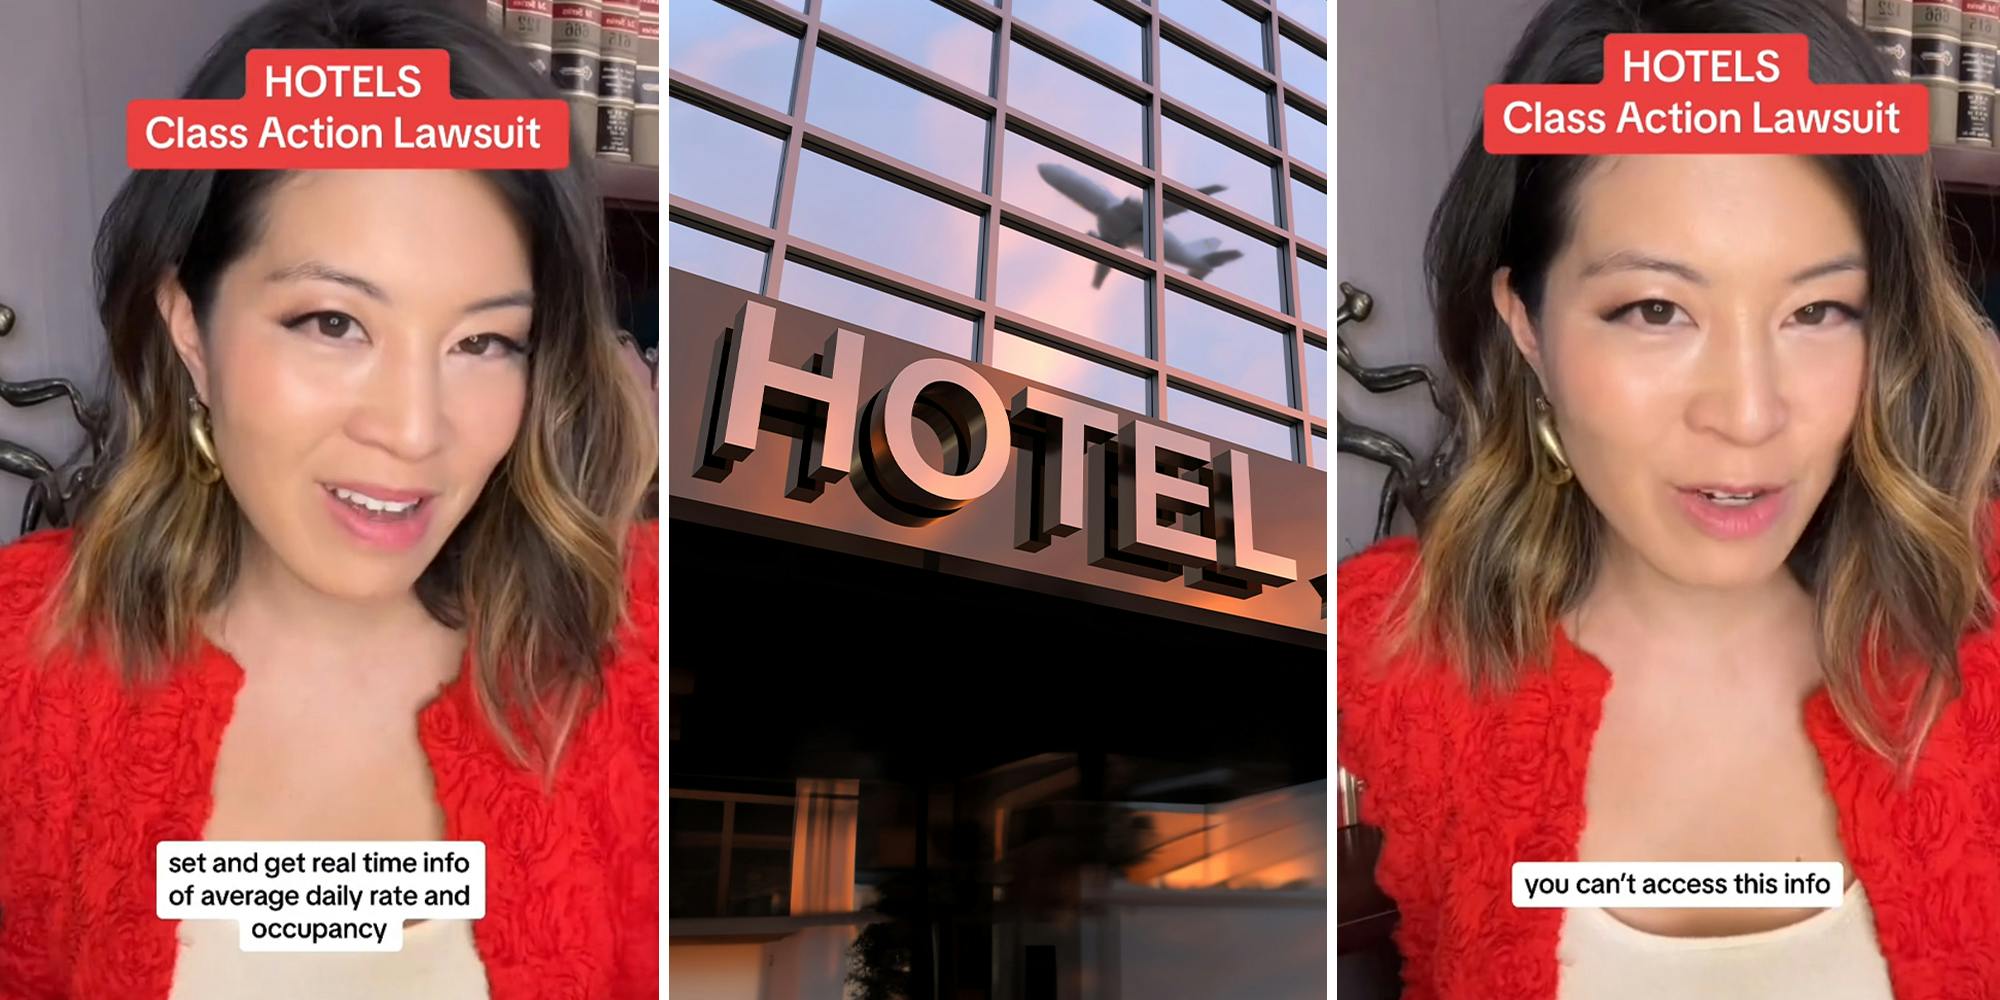 ‘Can confirm this is true. I worked at a Marriott’: Expert shares why room prices at hotels like Hilton, Marriott, IHG are ‘so high’ even when they’re empty